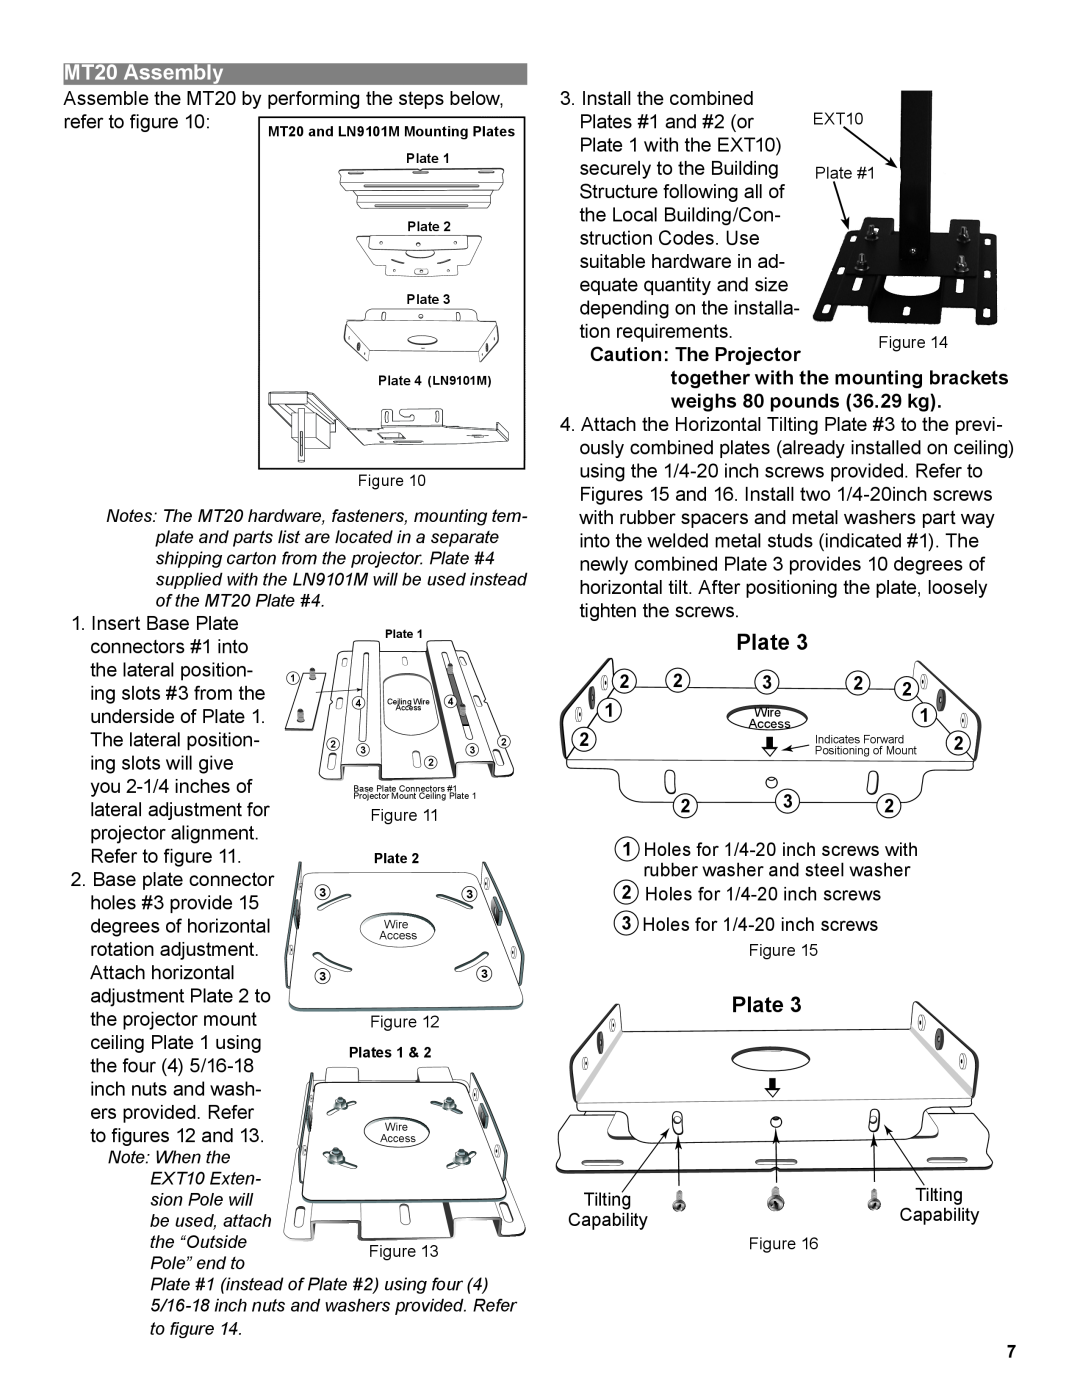 Marantz LN9101M manual Plate, MT20 Assembly, Assemble the MT20 by performing the steps below, refer to figure 